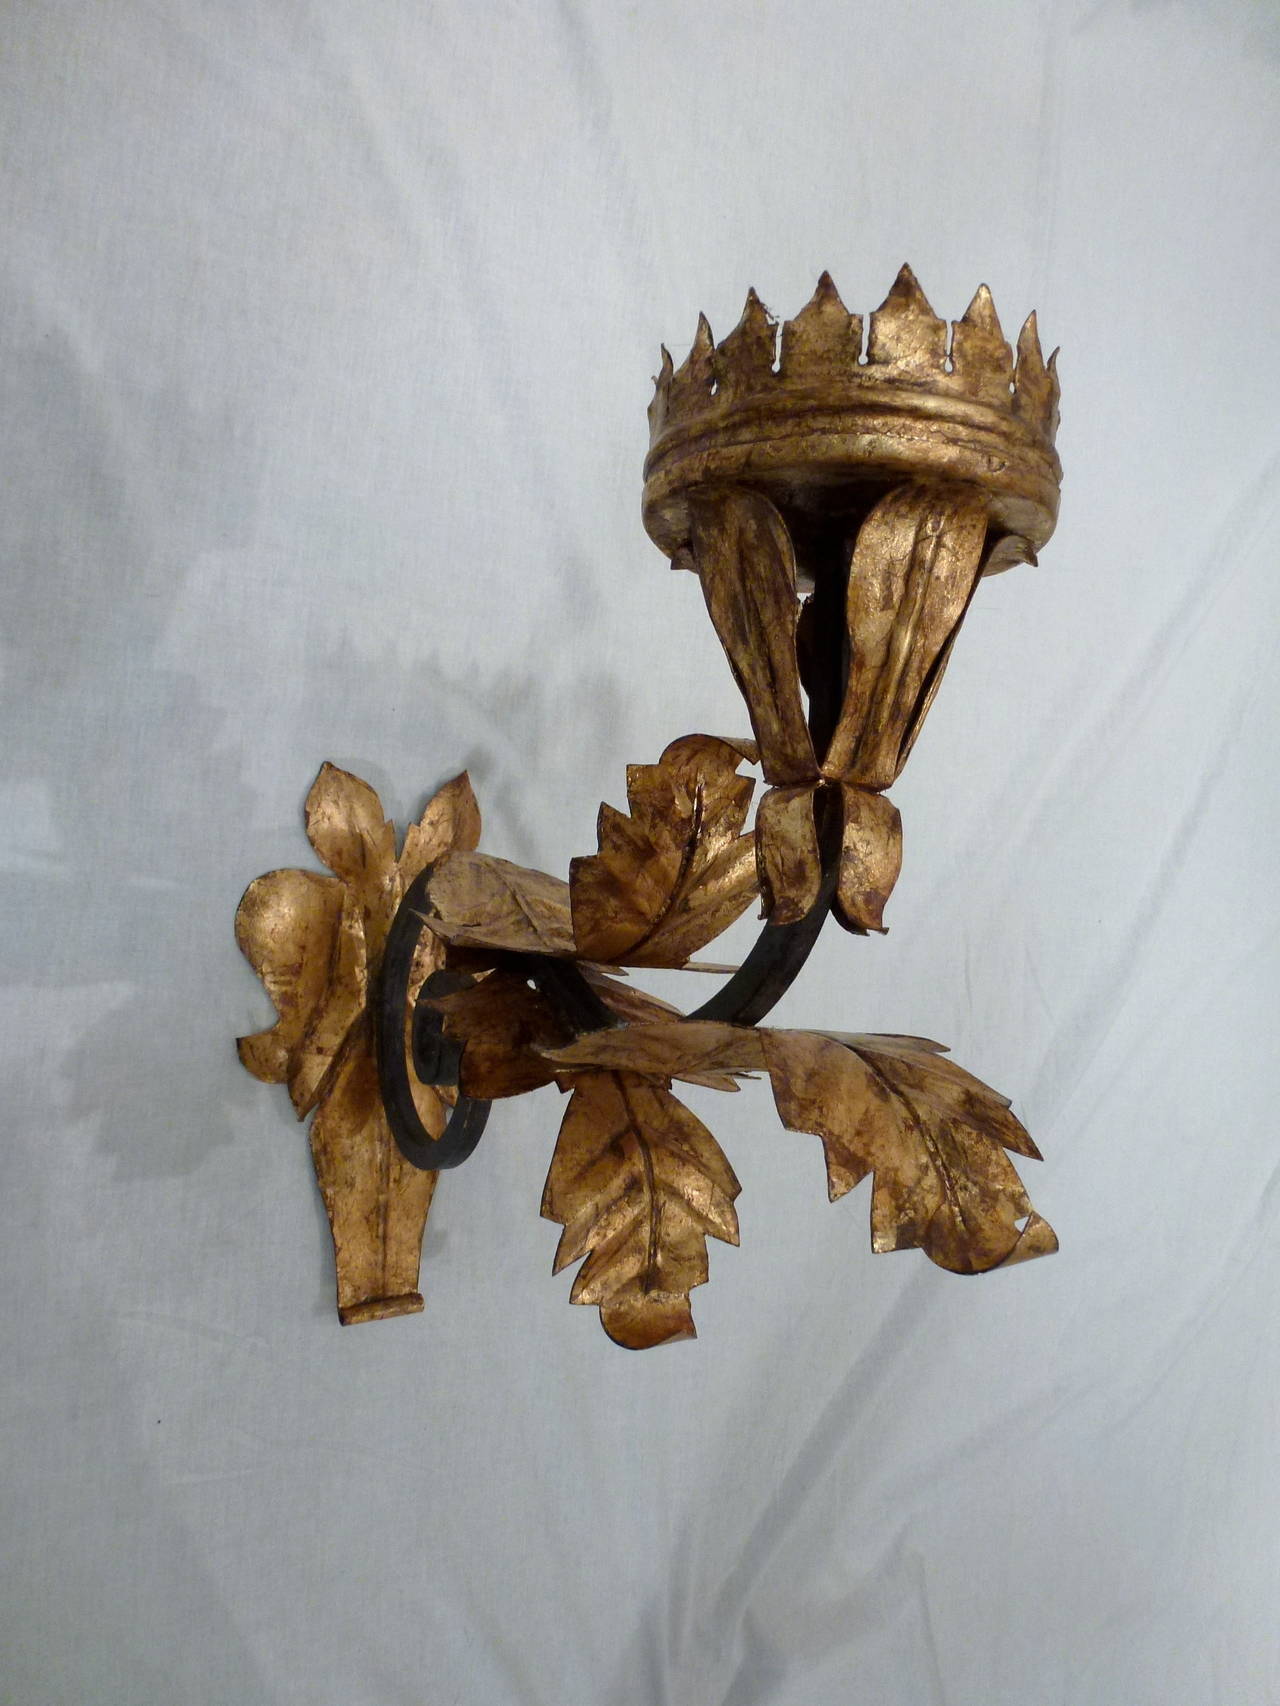 Incredible pair of Antique Italian Rococo style pricket candle wall sconces from the 19th century. Hand-wrought with gold leaf detailing and a wonderful patina. Each piece formed by hand. Designed to hold a pillar candle.